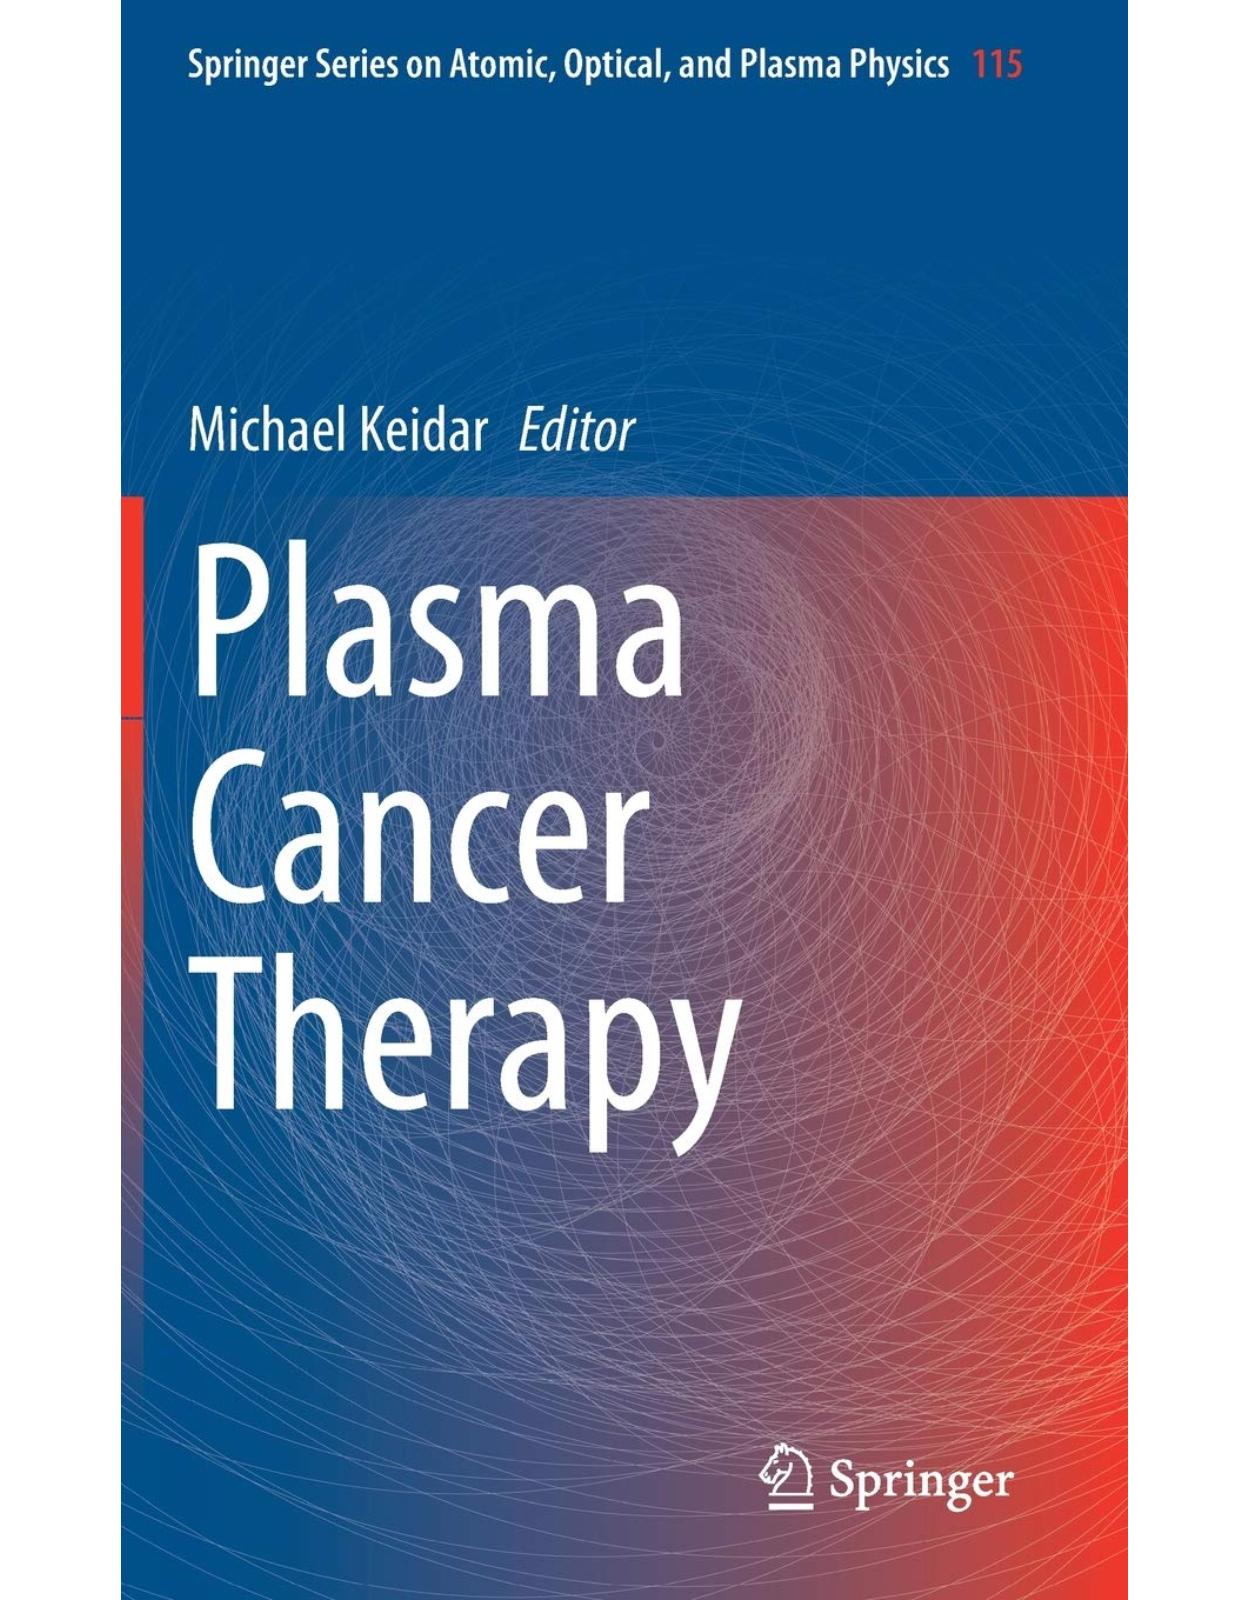 Plasma Cancer Therapy